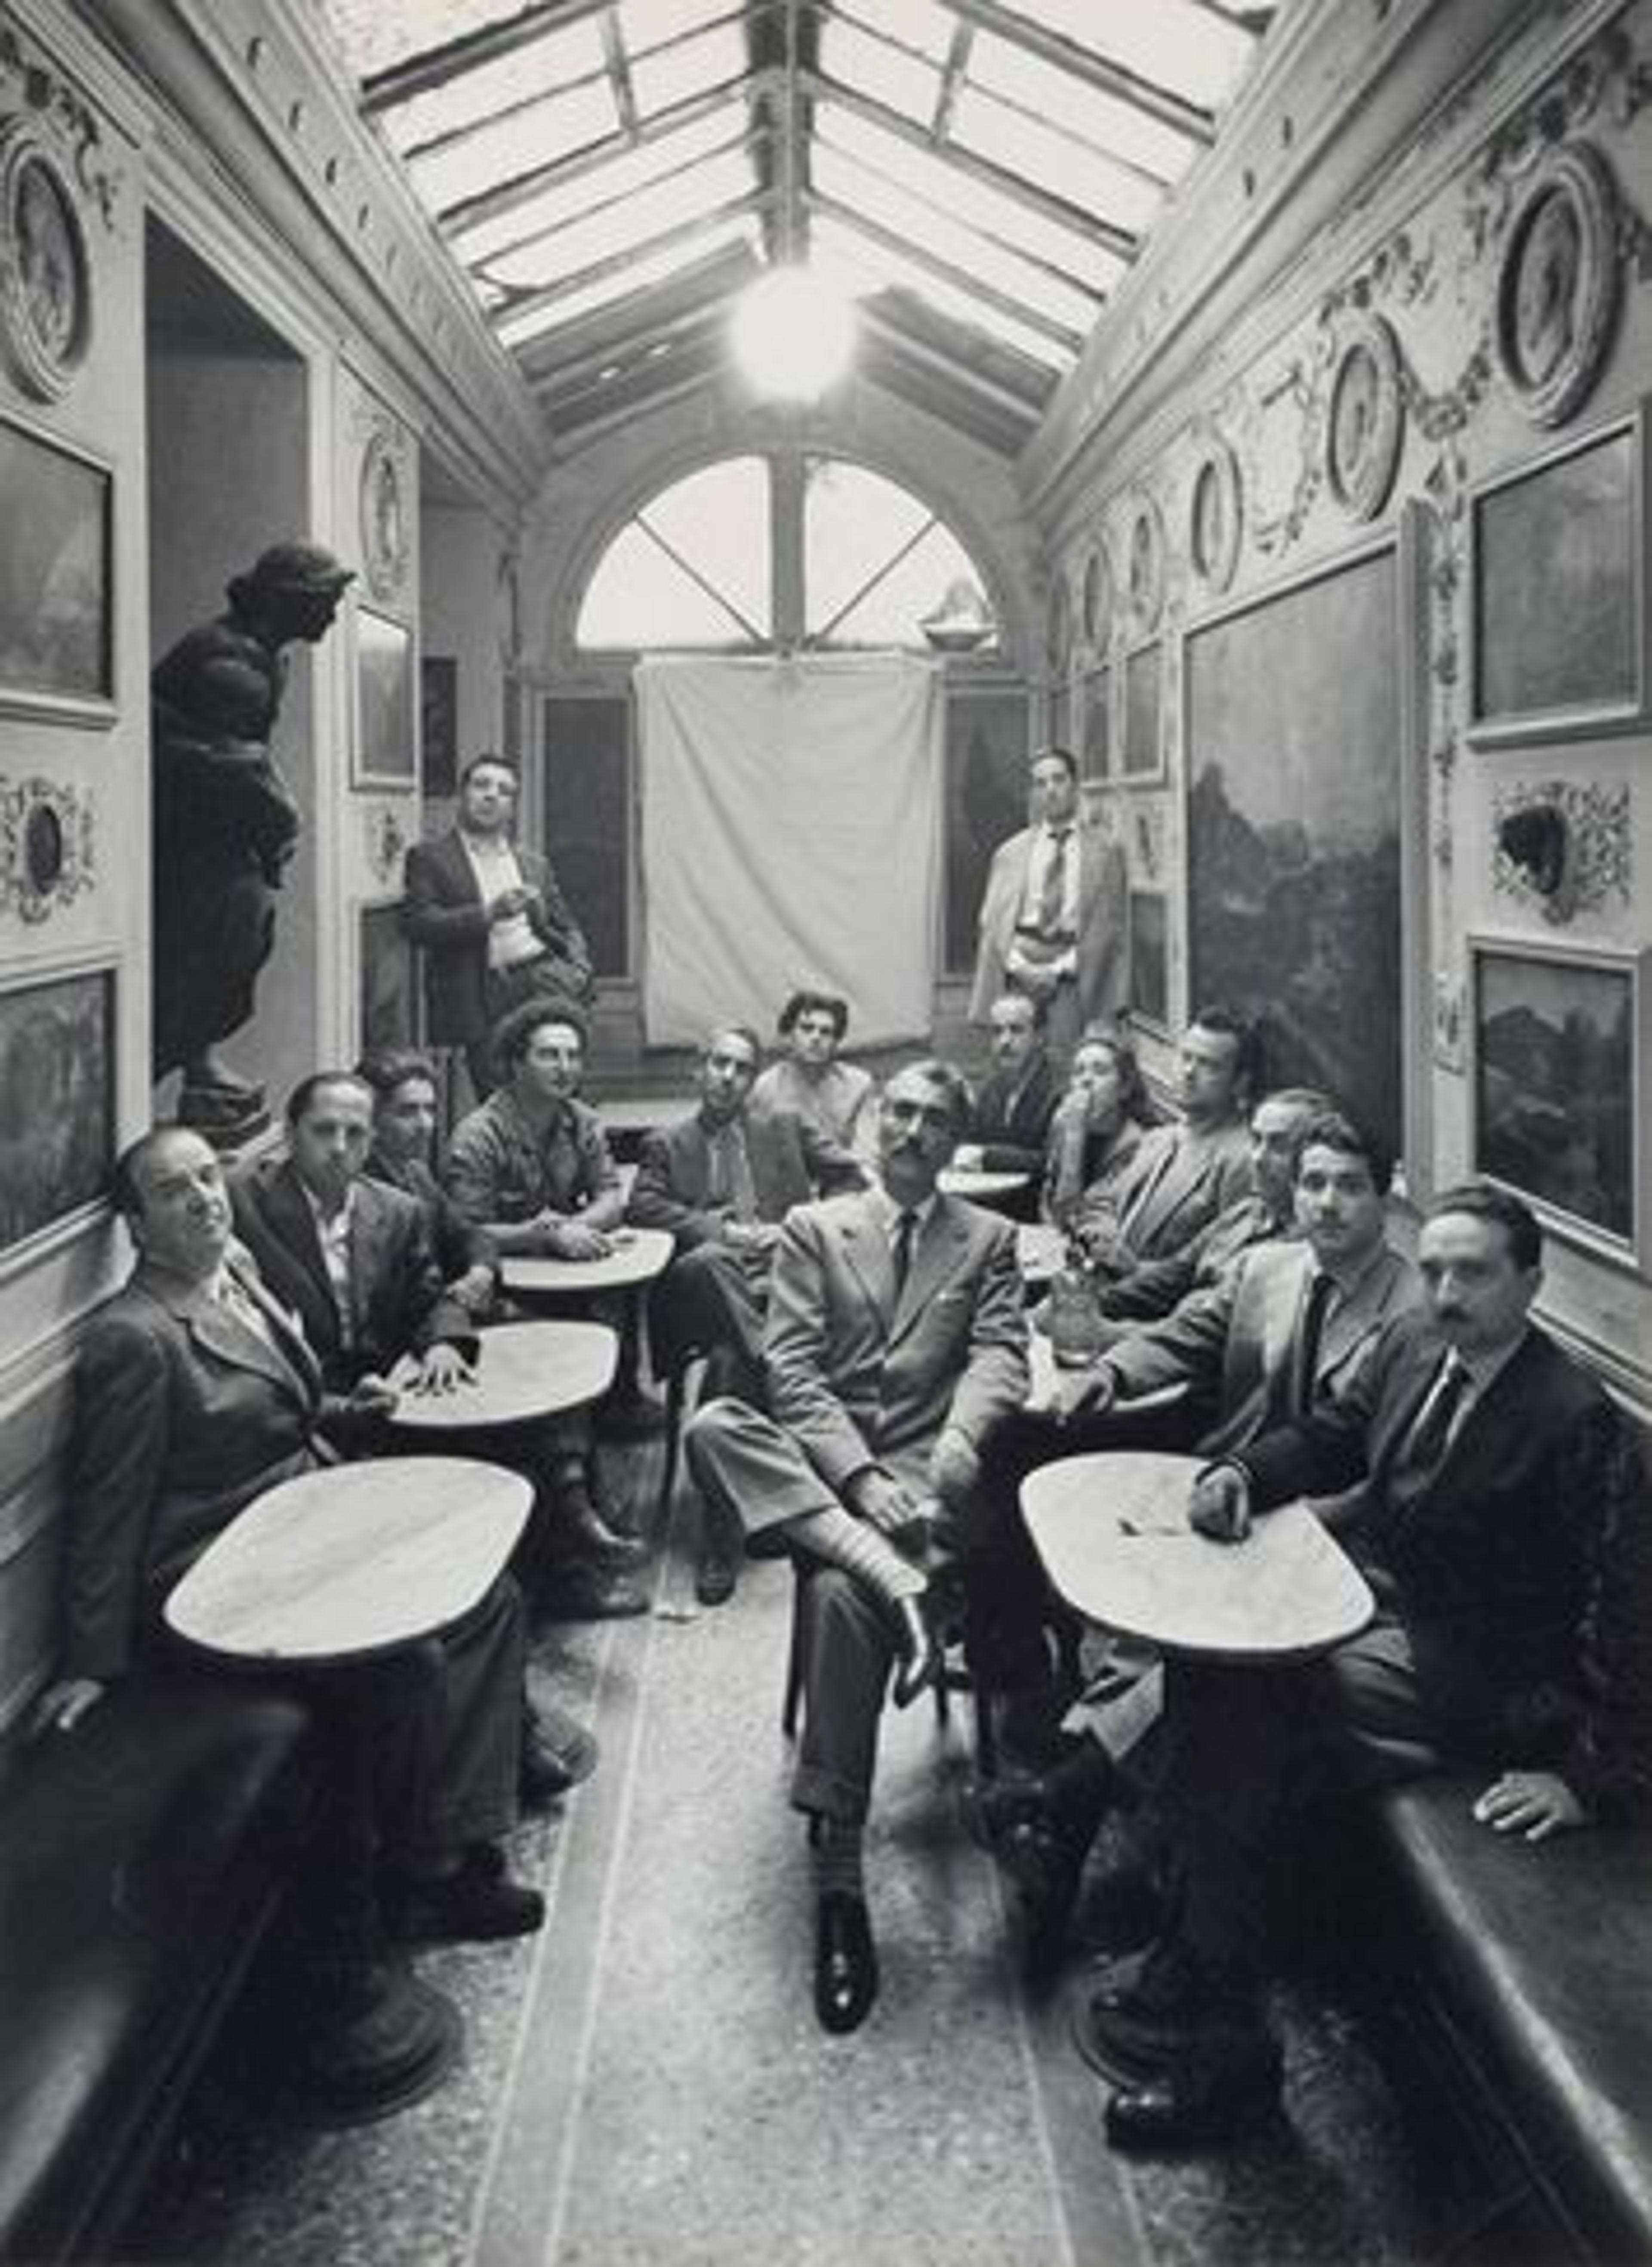 A portrait of artists taken inside the Caffe Greco by Irving Penn